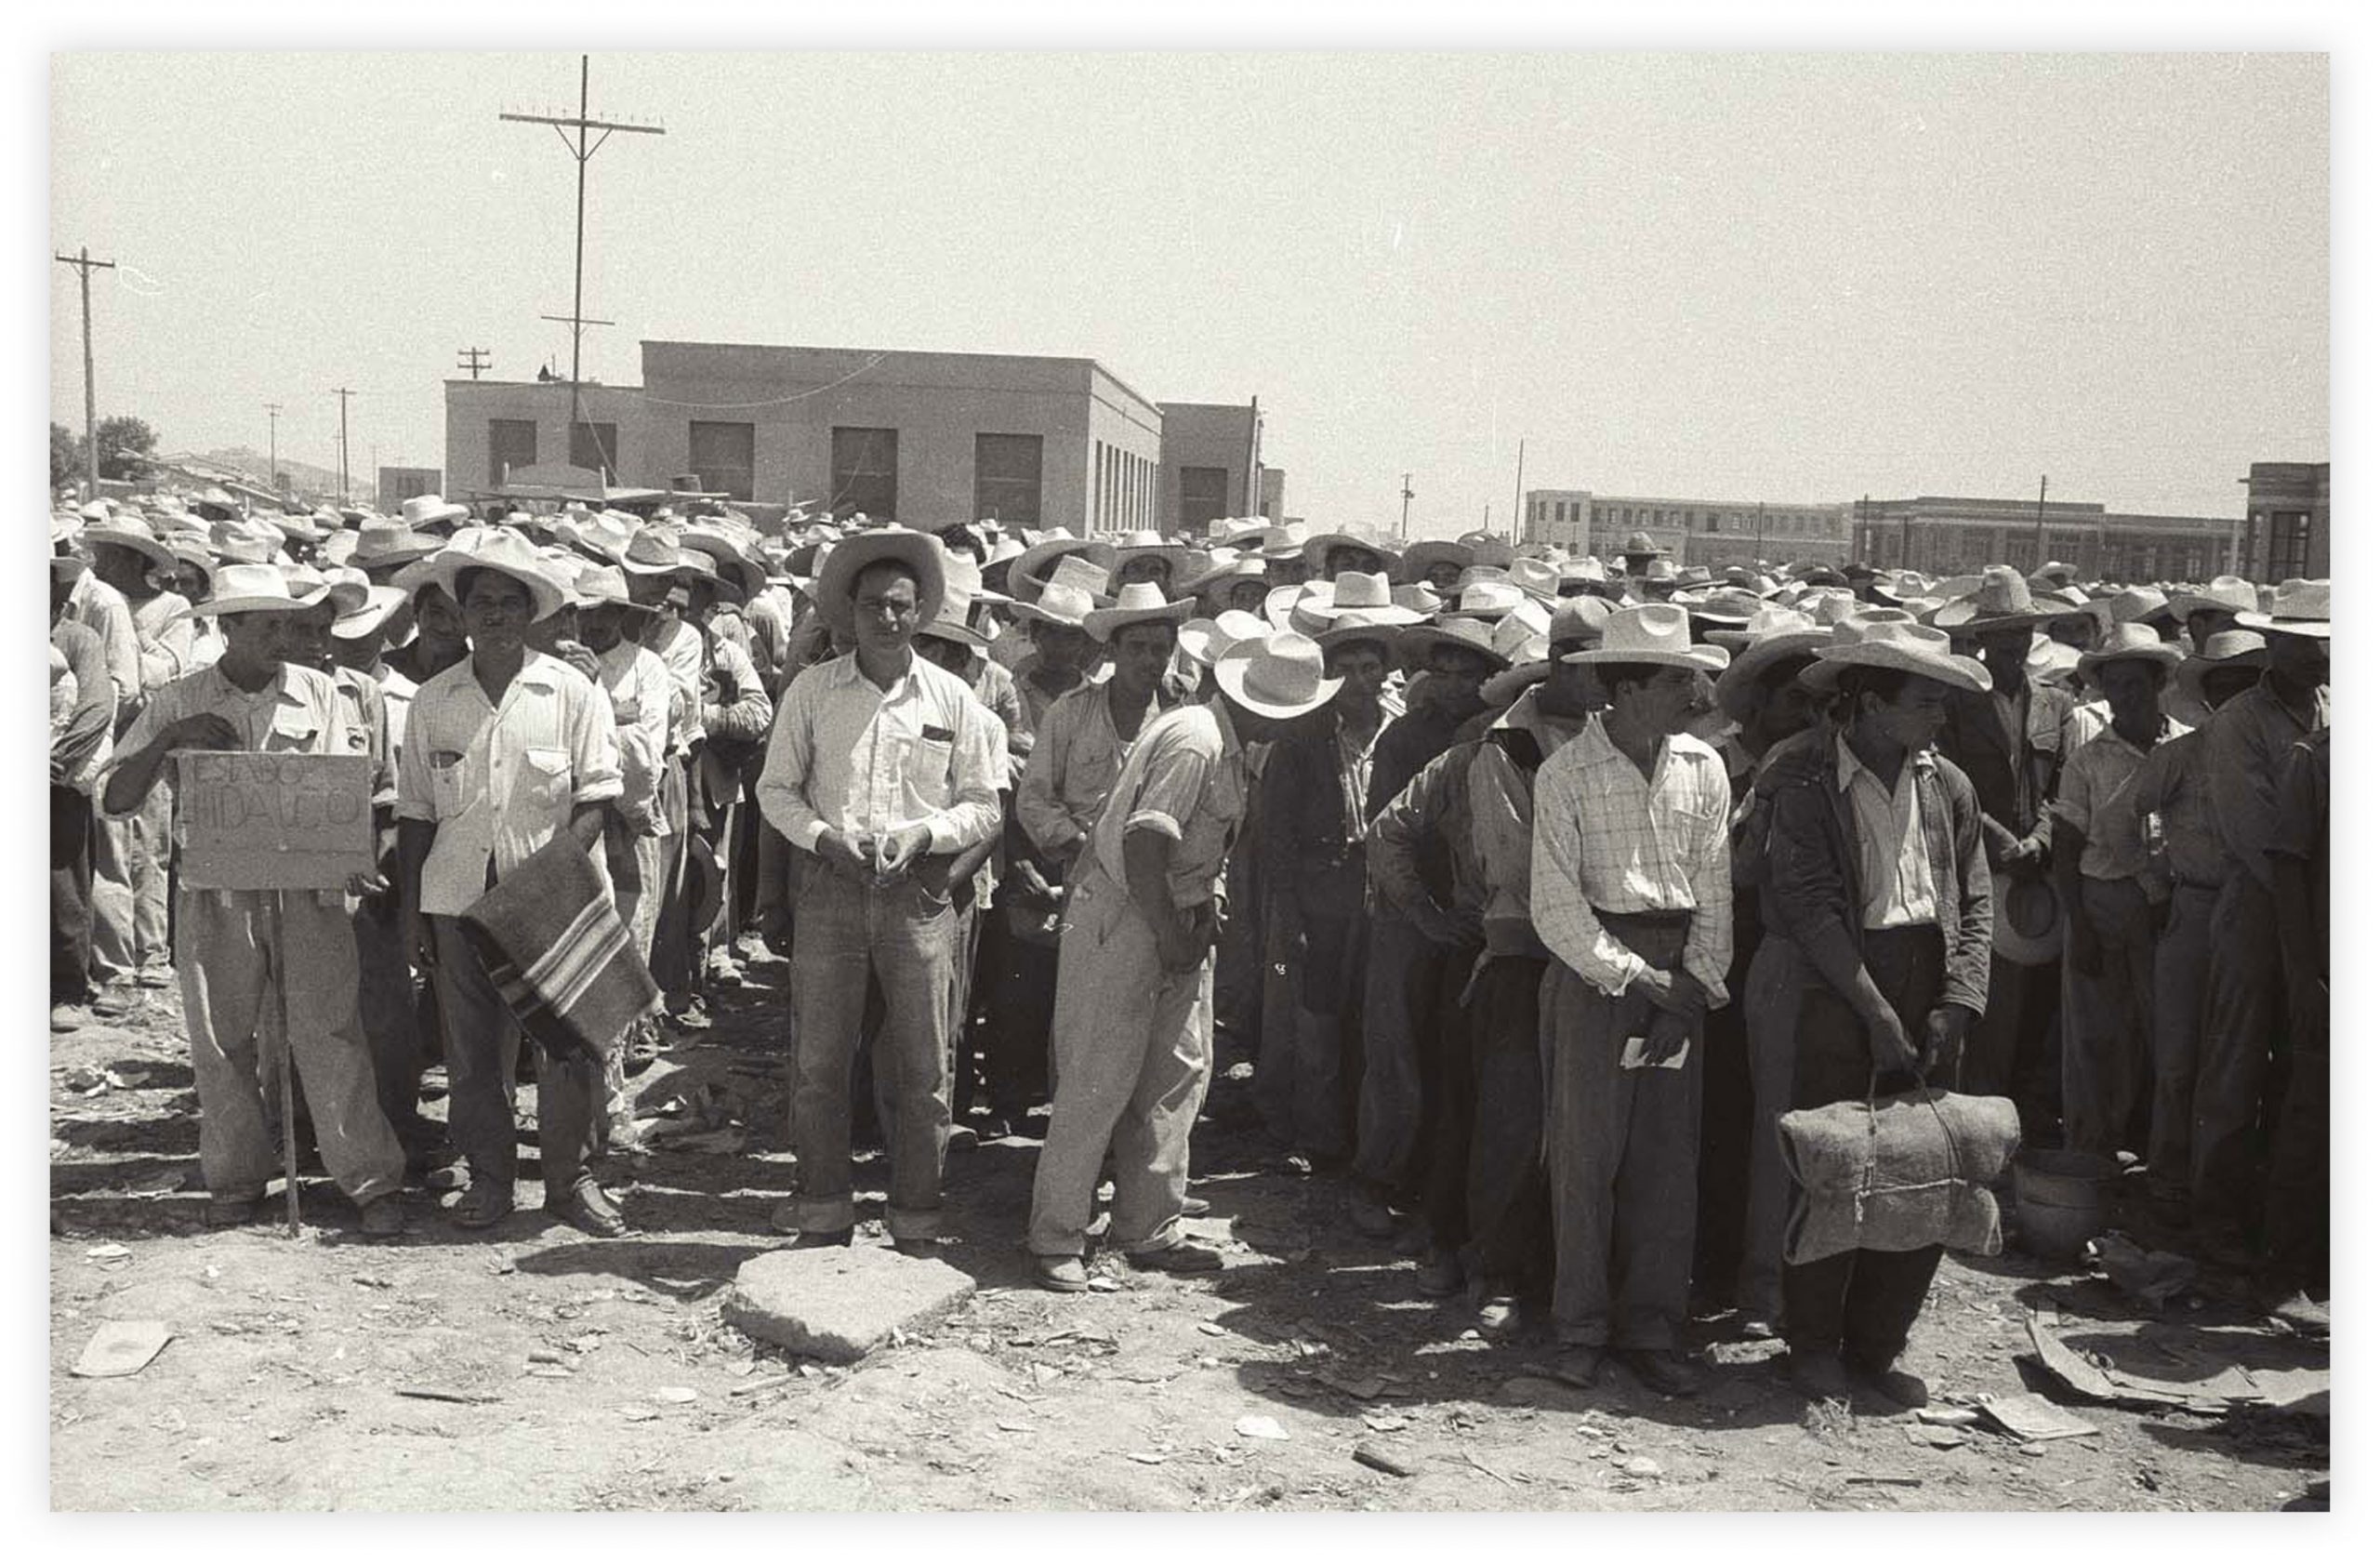 Line up of Mexicans several with suitcases waiting to be called up for processing at the Control Station in Monterrey, Mex. Each line represents a particular area of Mexico from which the braceros come and they are processed by groups.